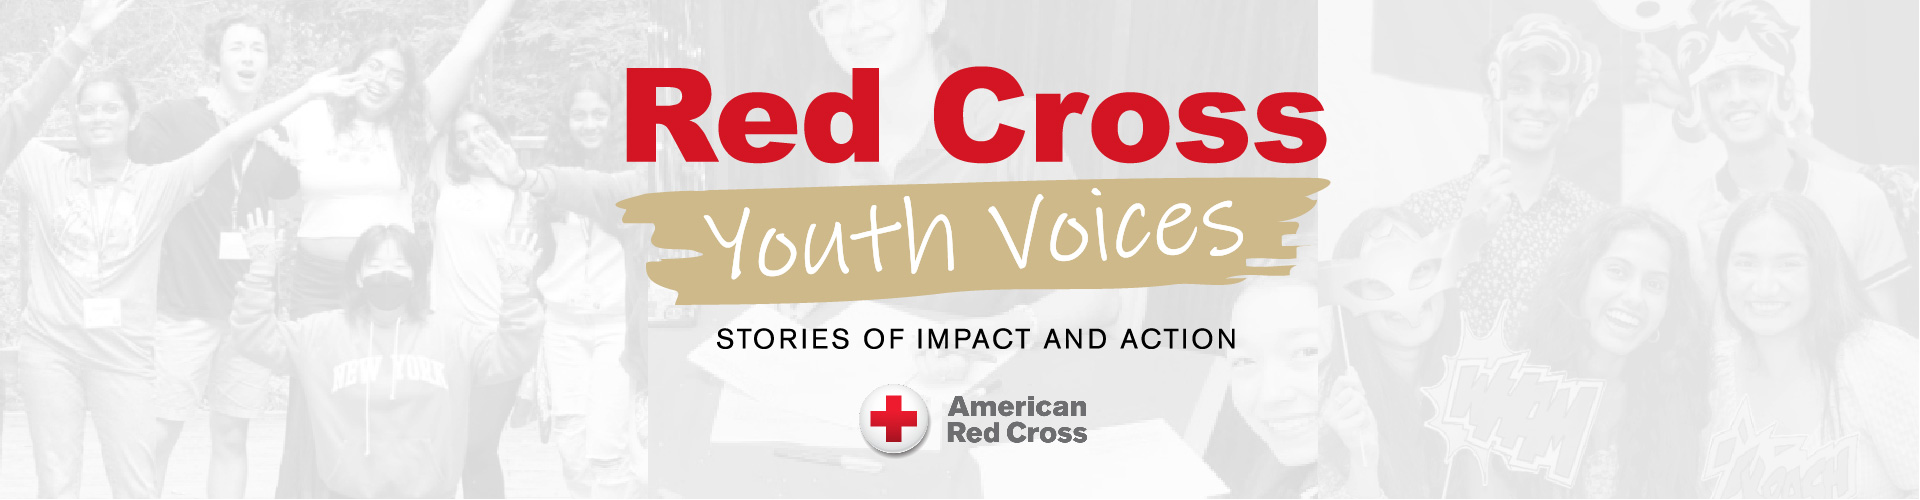 Red Cross Youth Voices Graphic